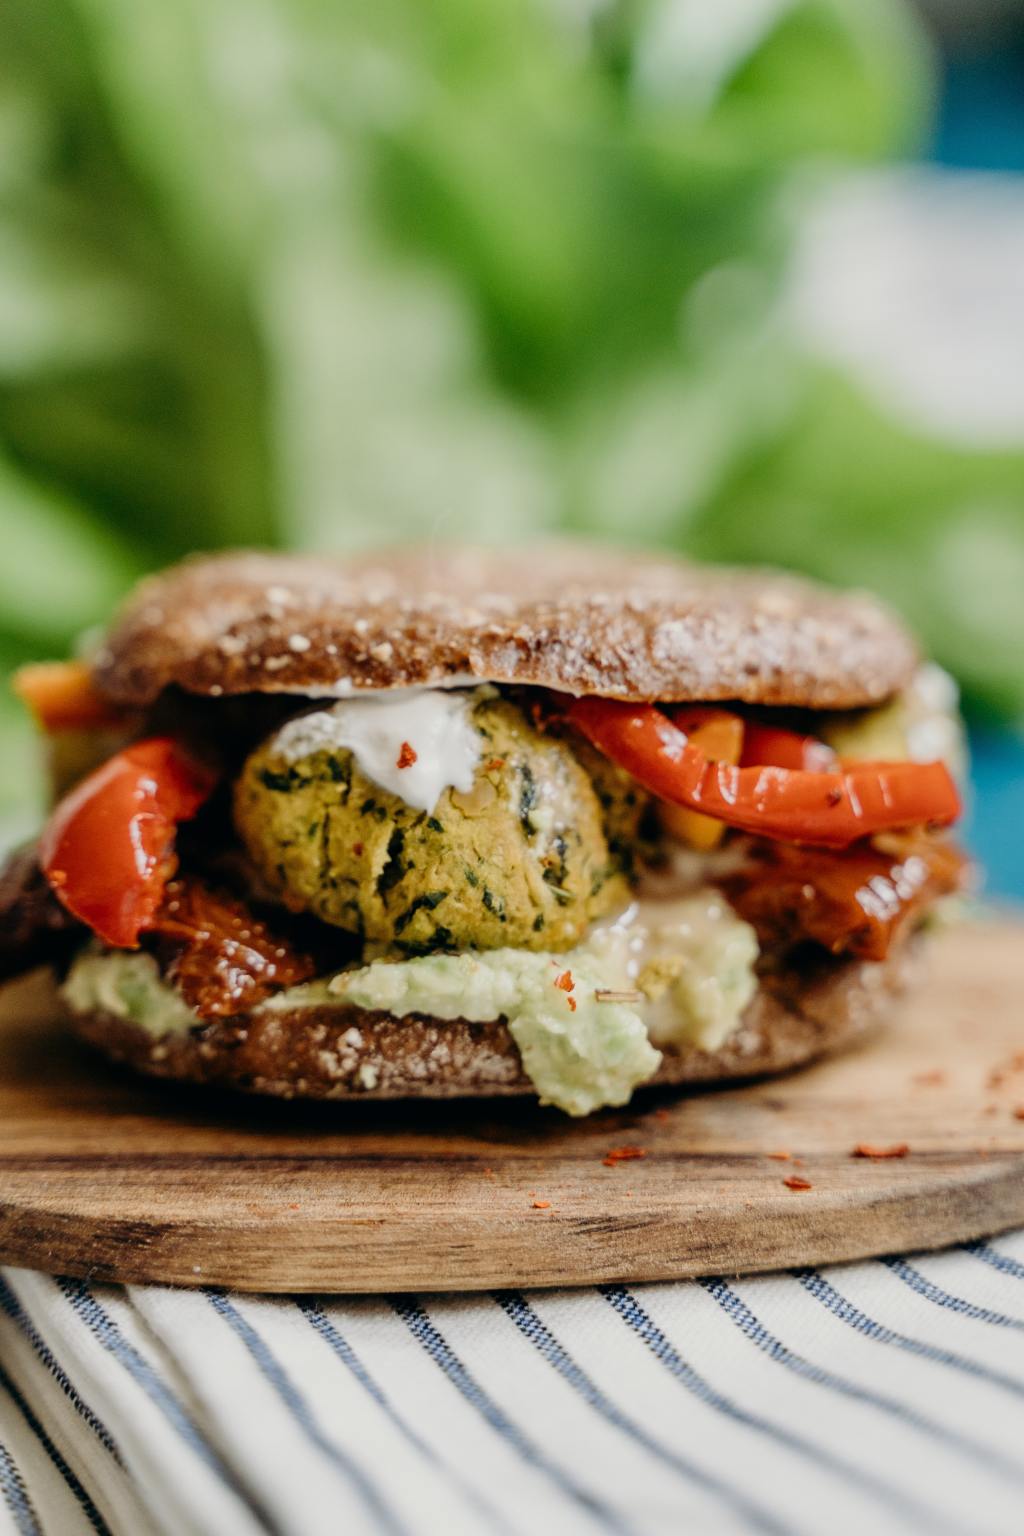 5 Plant-based Burgers to Try On Meatless Monday